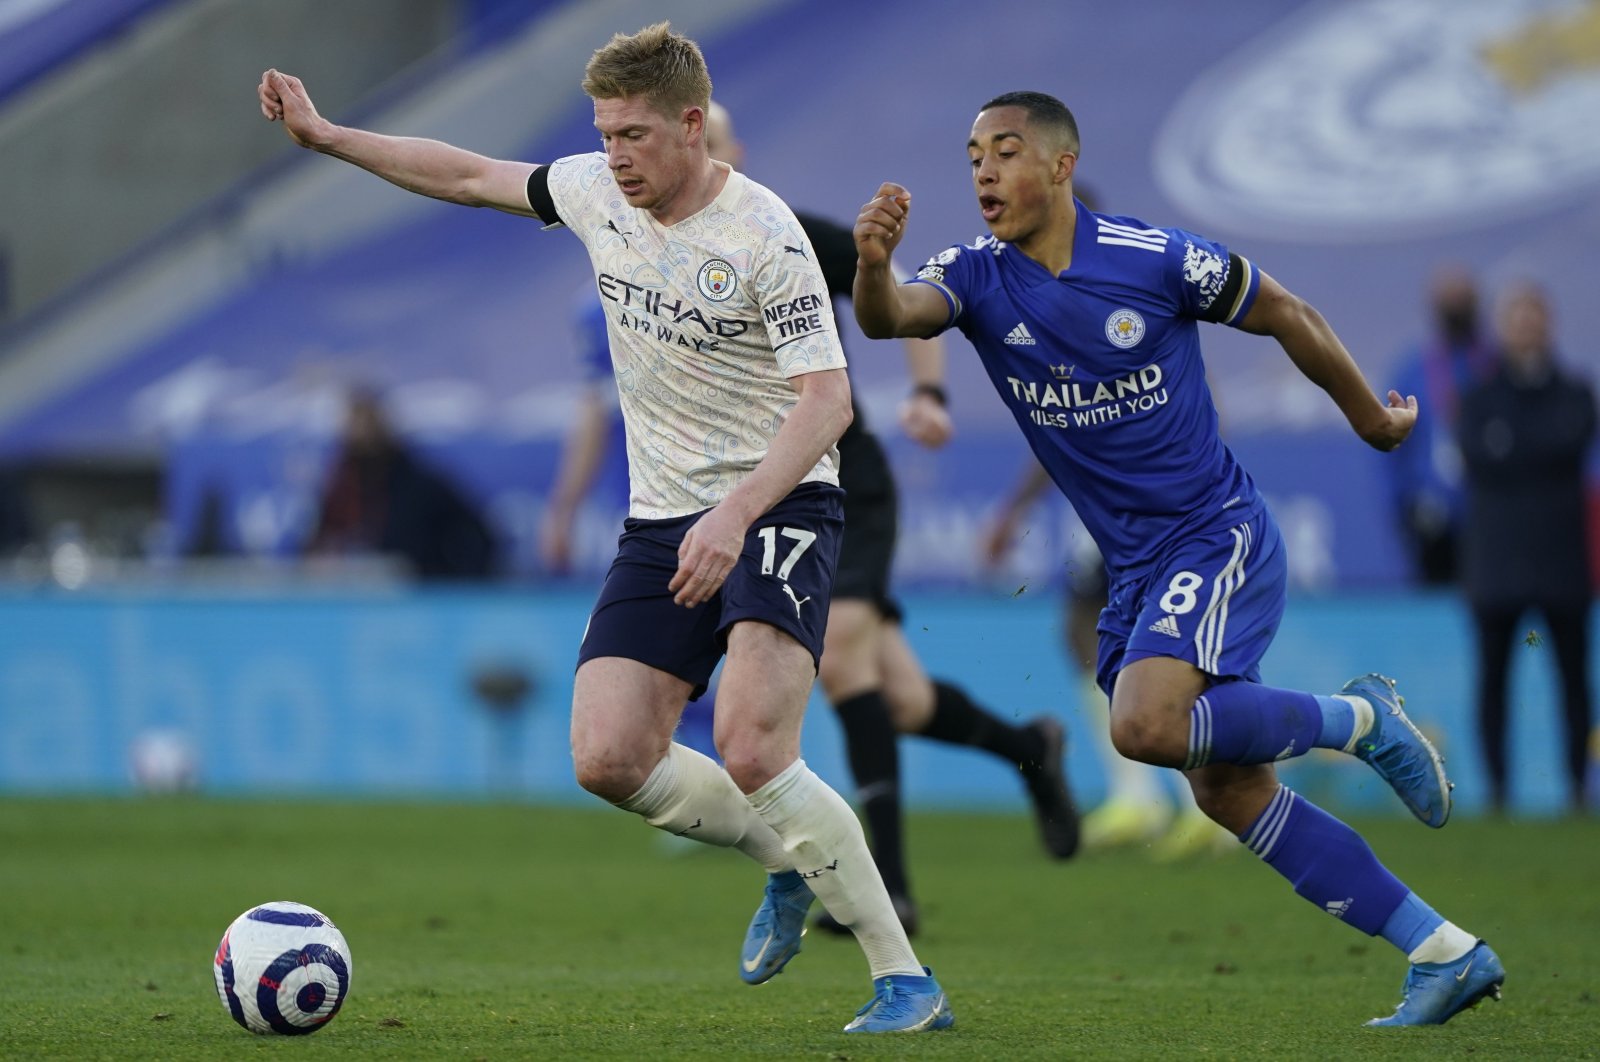 Manchester City's Kevin De Bruyne (L) in action against Leicester's Youri Tielemans (R) during a Premier League match in Leicester, Britain, April 3, 2021. (EPA Photo)